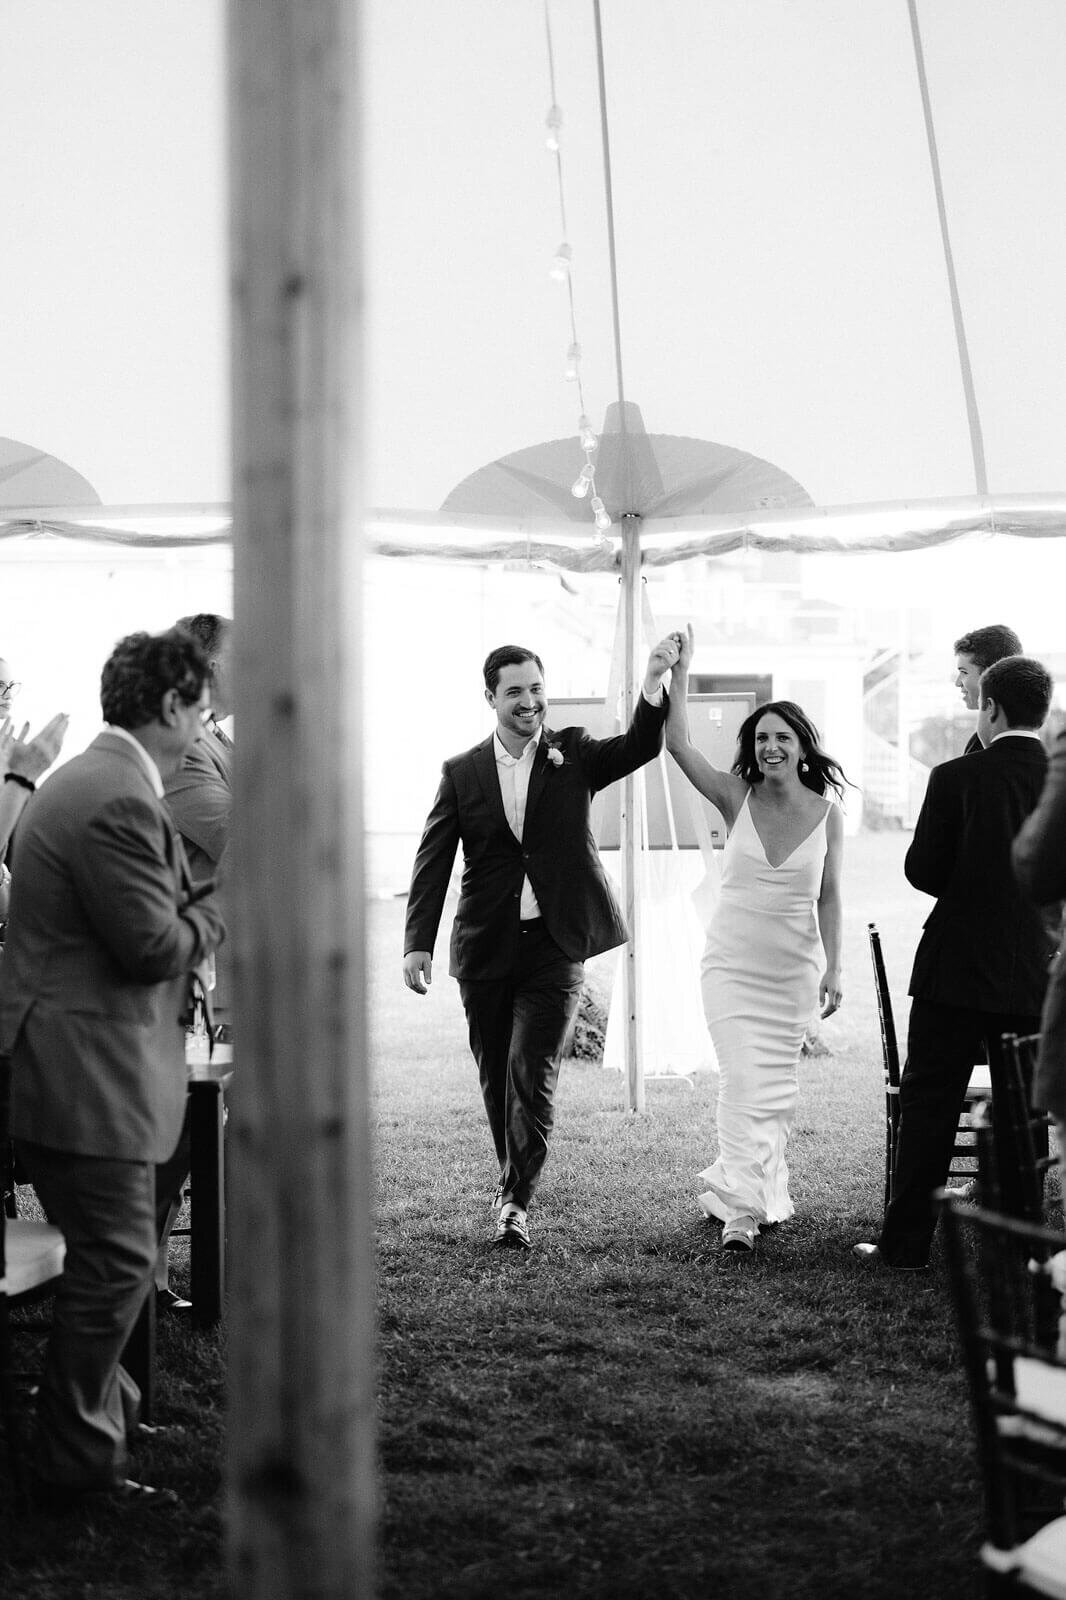 Black and white photo of the bride and groom entering the reception venue as the guests clapped, in Cape Cod Summer Tent, MA.